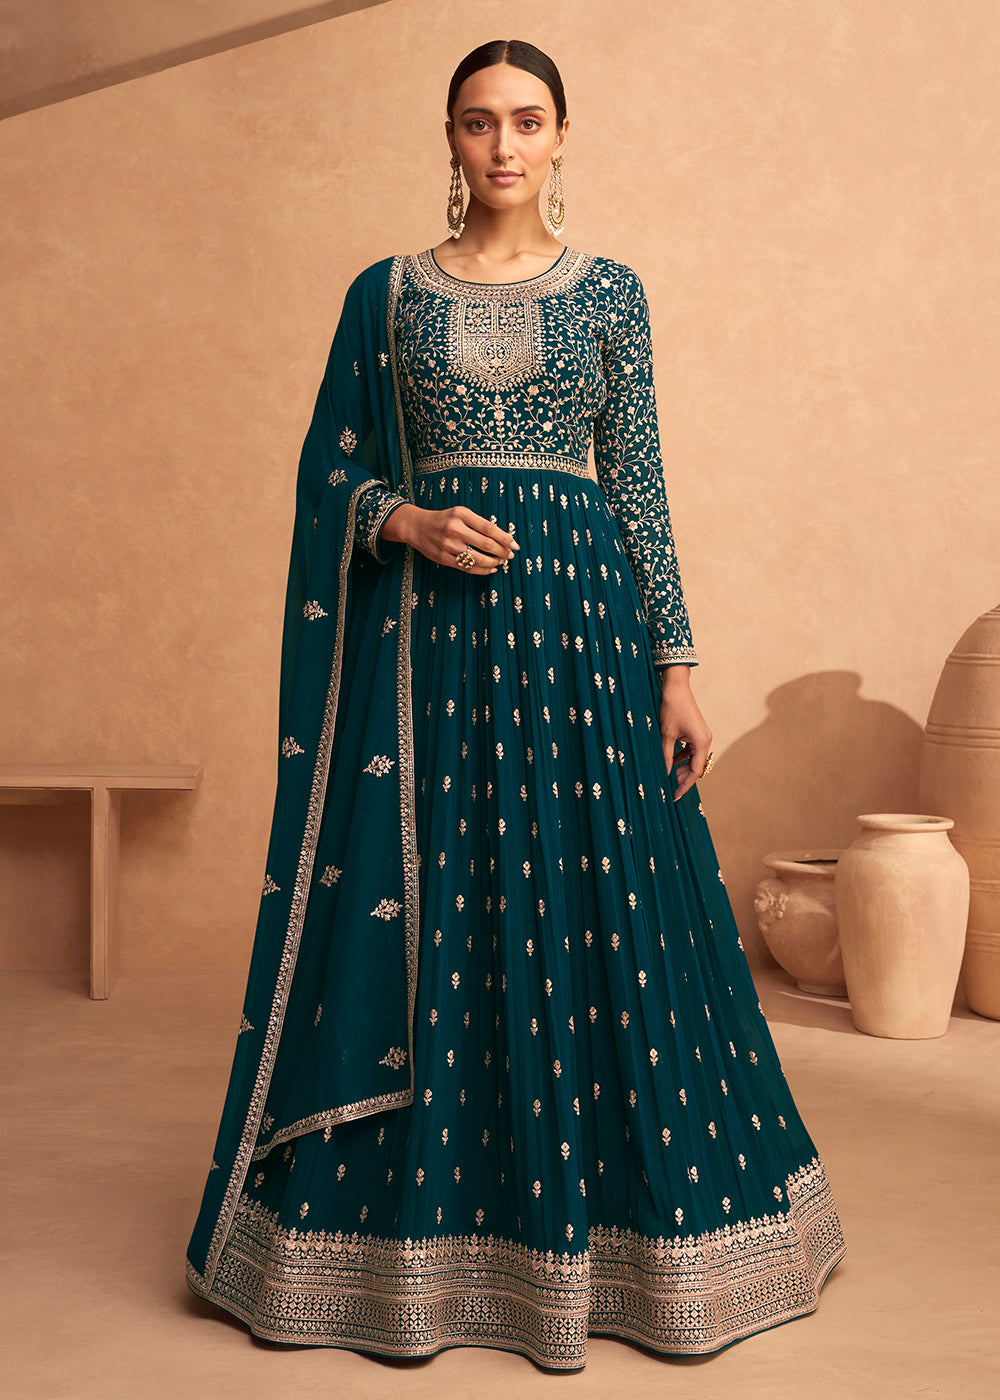 Buy Now Bewitching Turquoise Georgette Wedding Festive Anarkali Online in USA, UK, Australia, New Zealand, Canada & Worldwide at Empress Clothing.